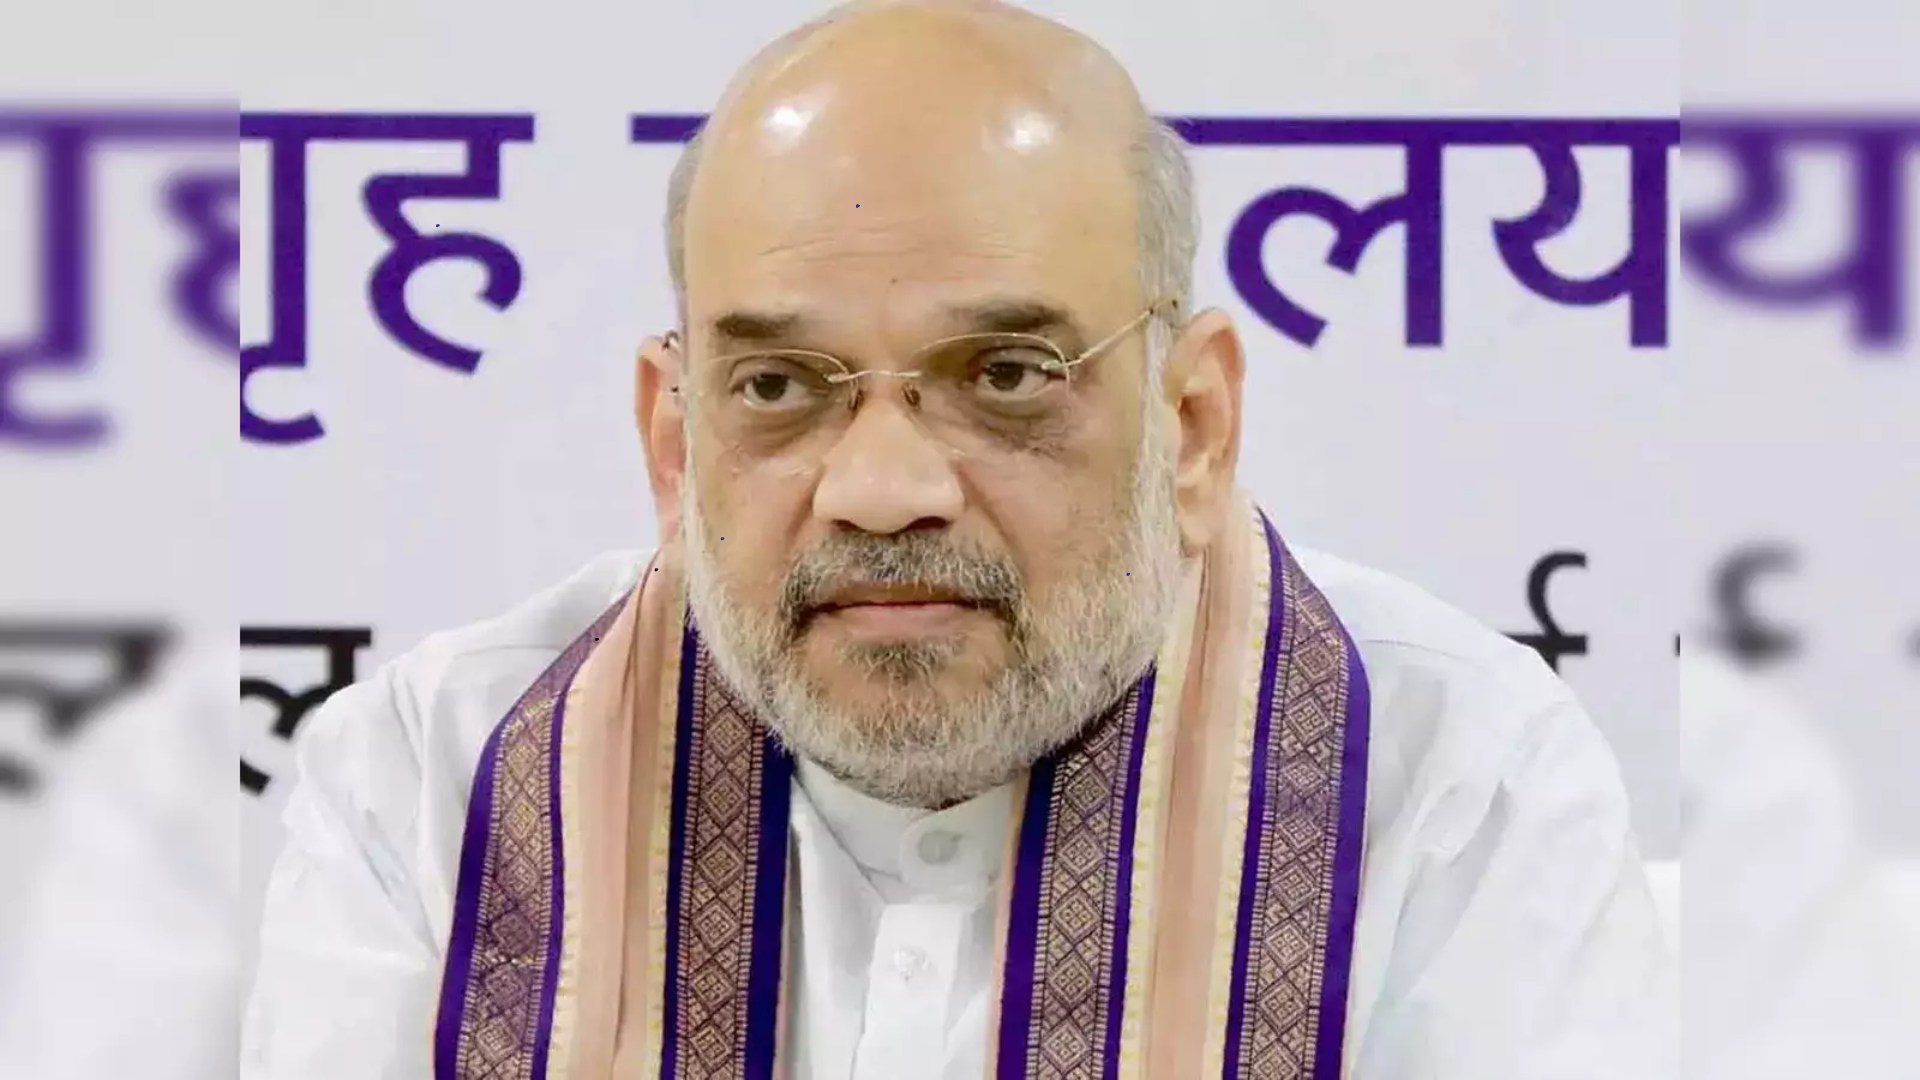 Amit Shah asserts PM Modi’s vision for advancing India into a developed nation